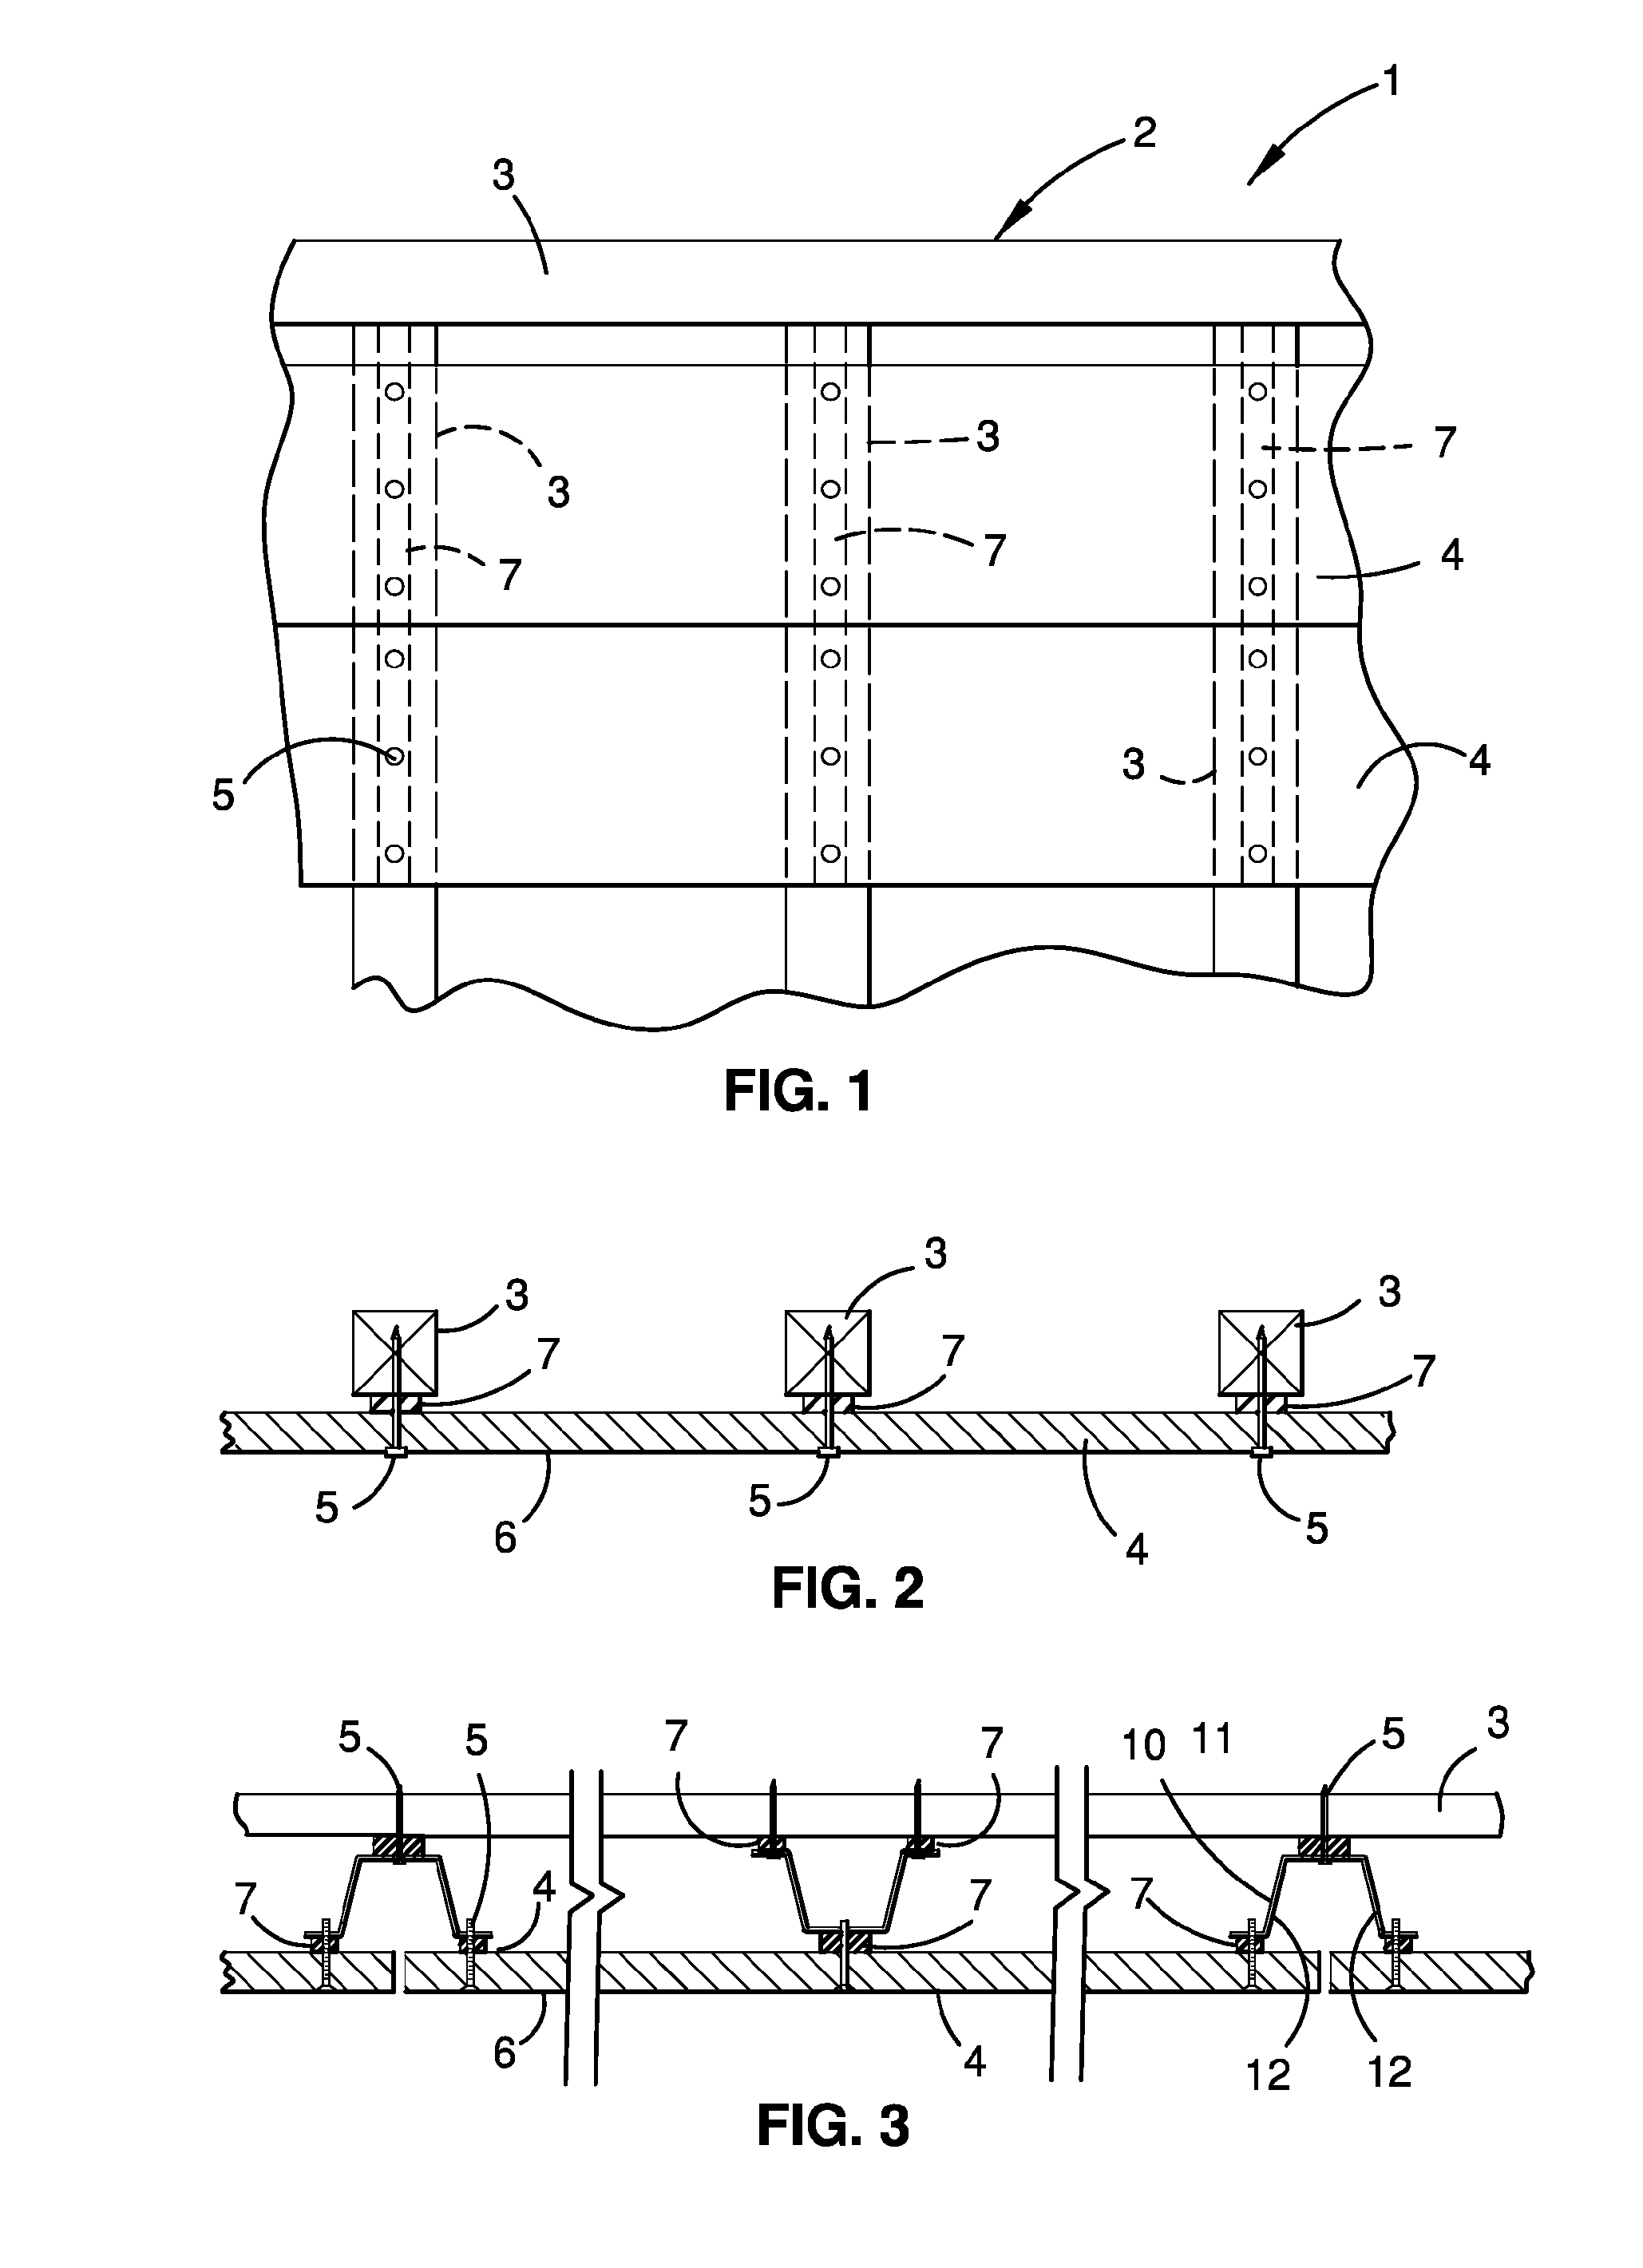 Building system with multi-function insulation barrier